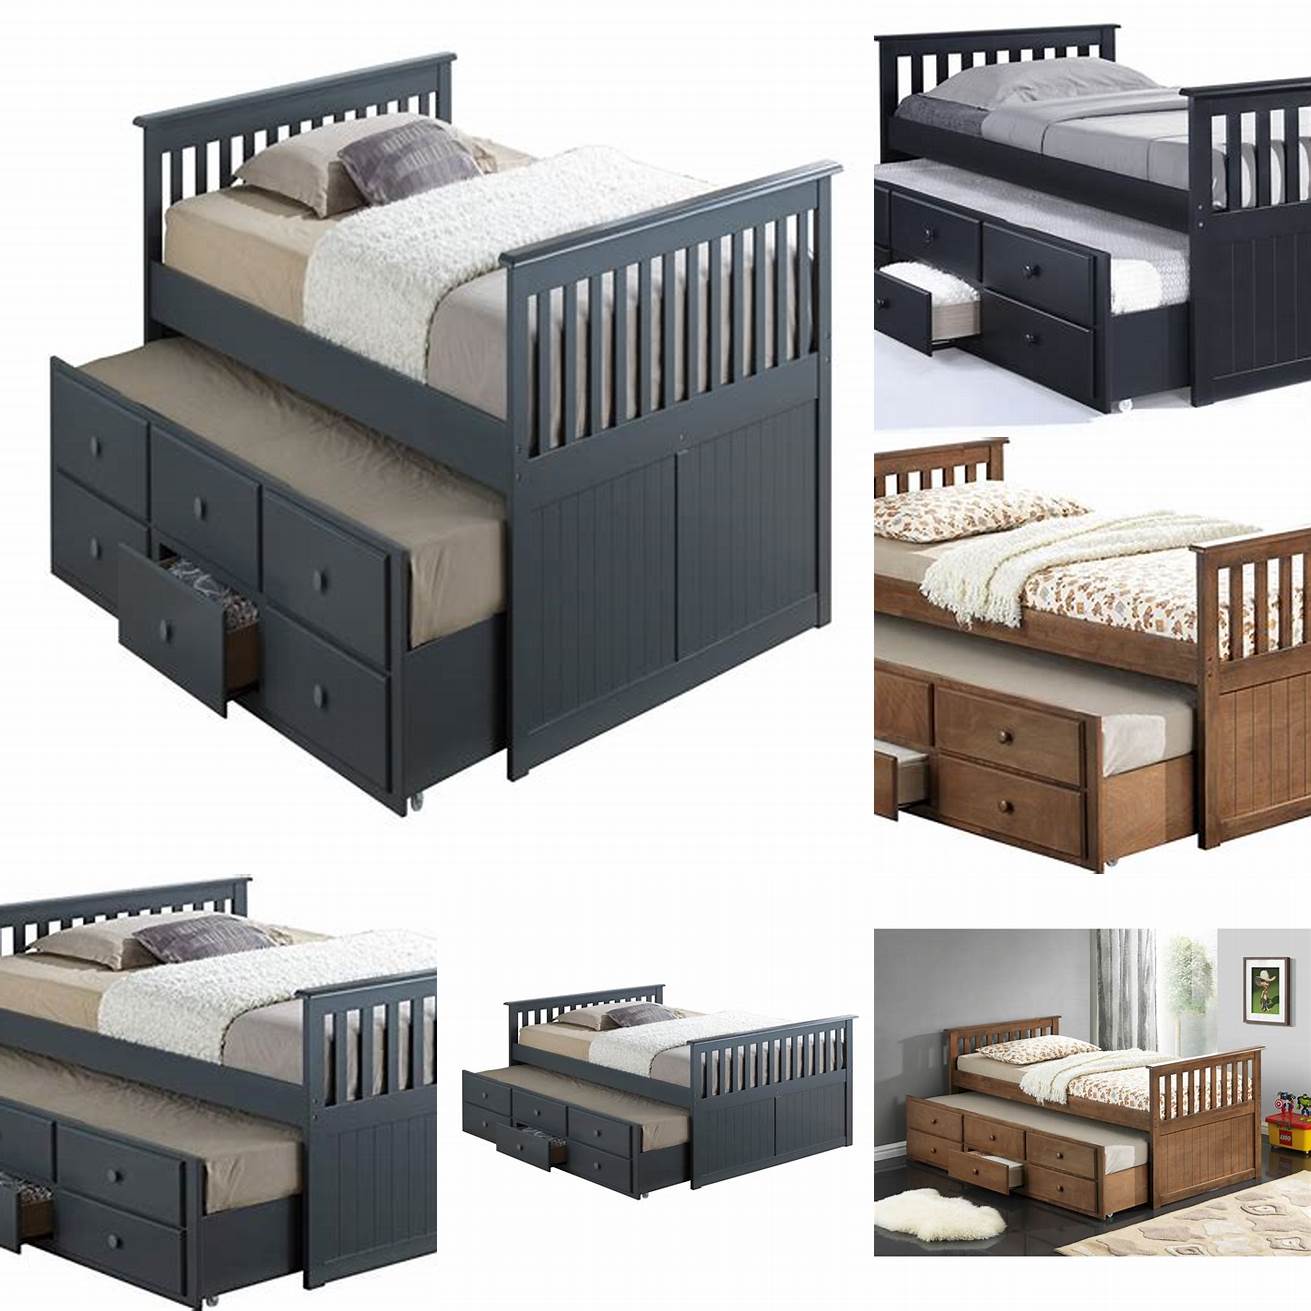 1 Broyhill Kids Marco Island Captains Bed This platform bed comes with built-in storage options and a trundle bed for sleepovers